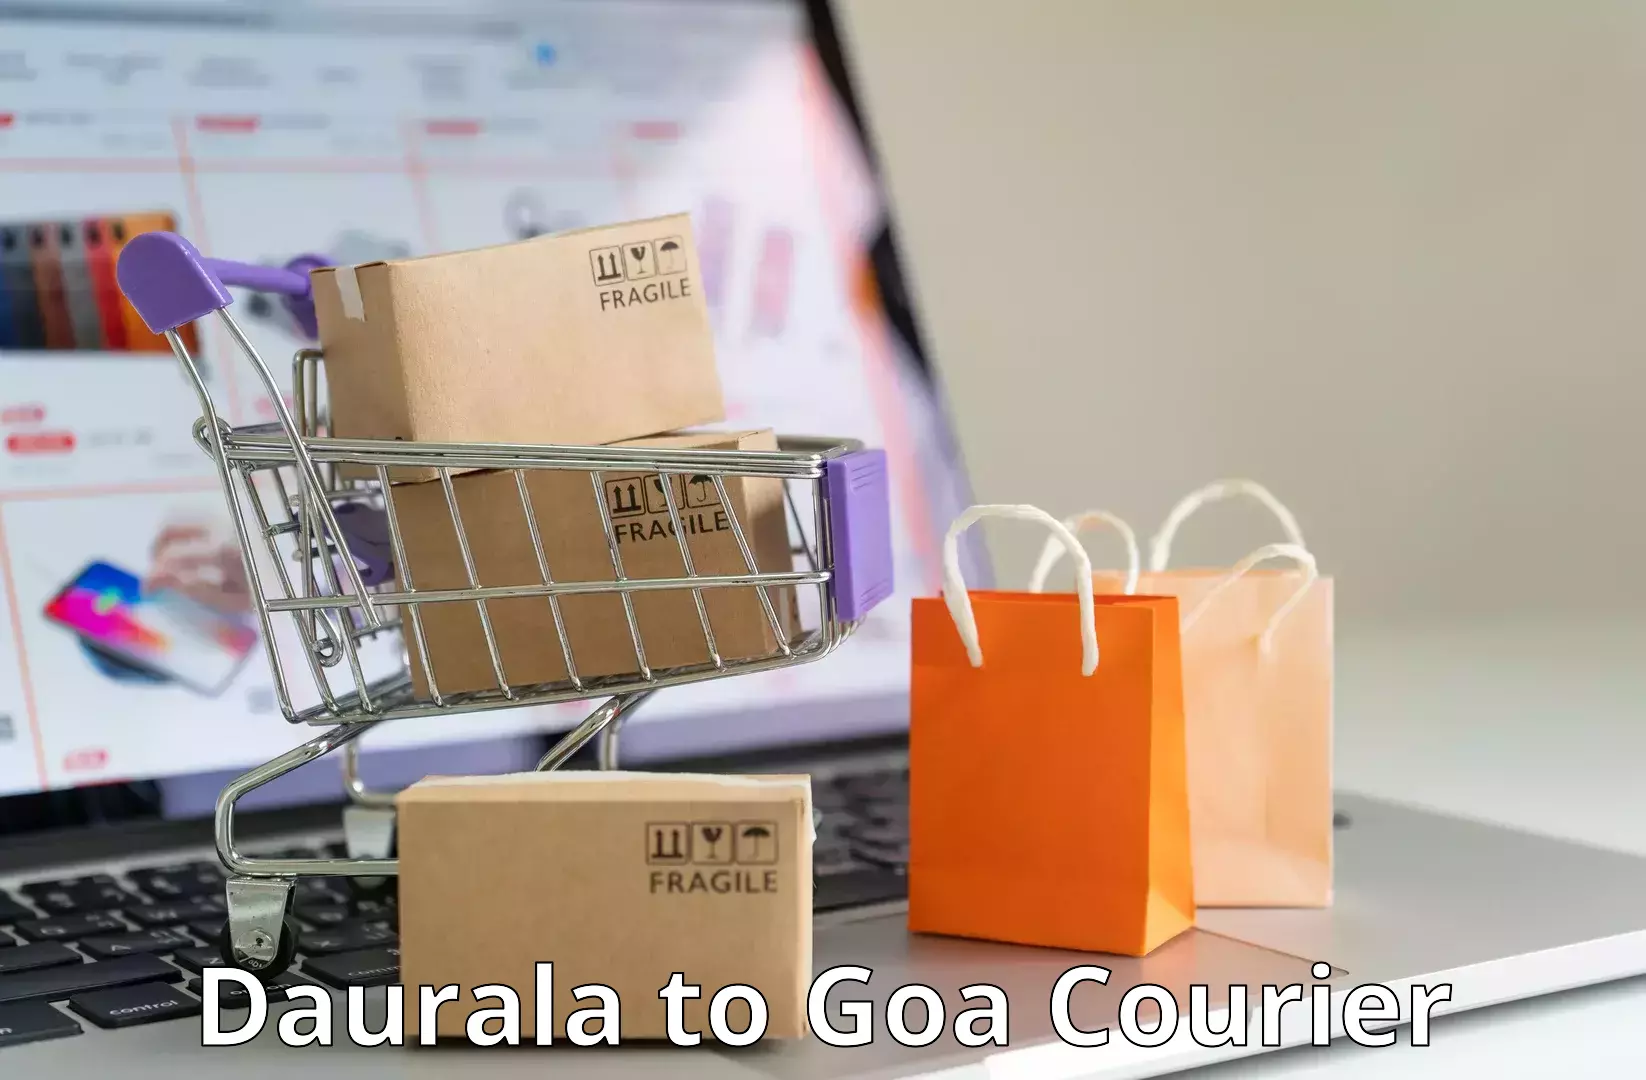 Rural area delivery Daurala to South Goa